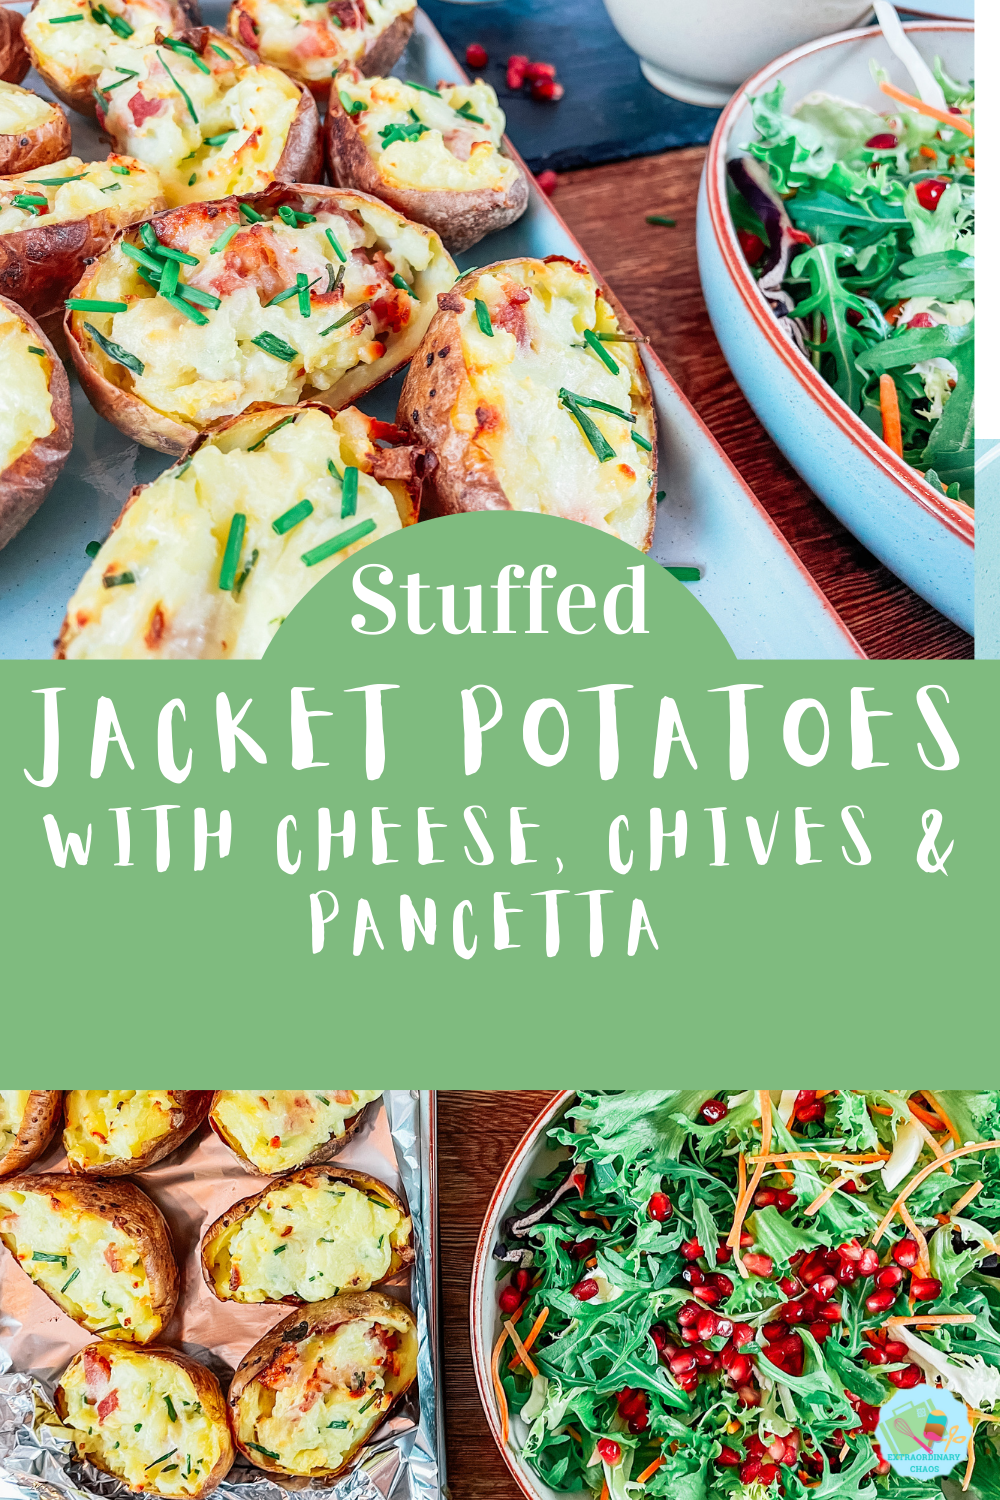 Stuffed Jacket Potatoes With Cheese Chives and Pancetta